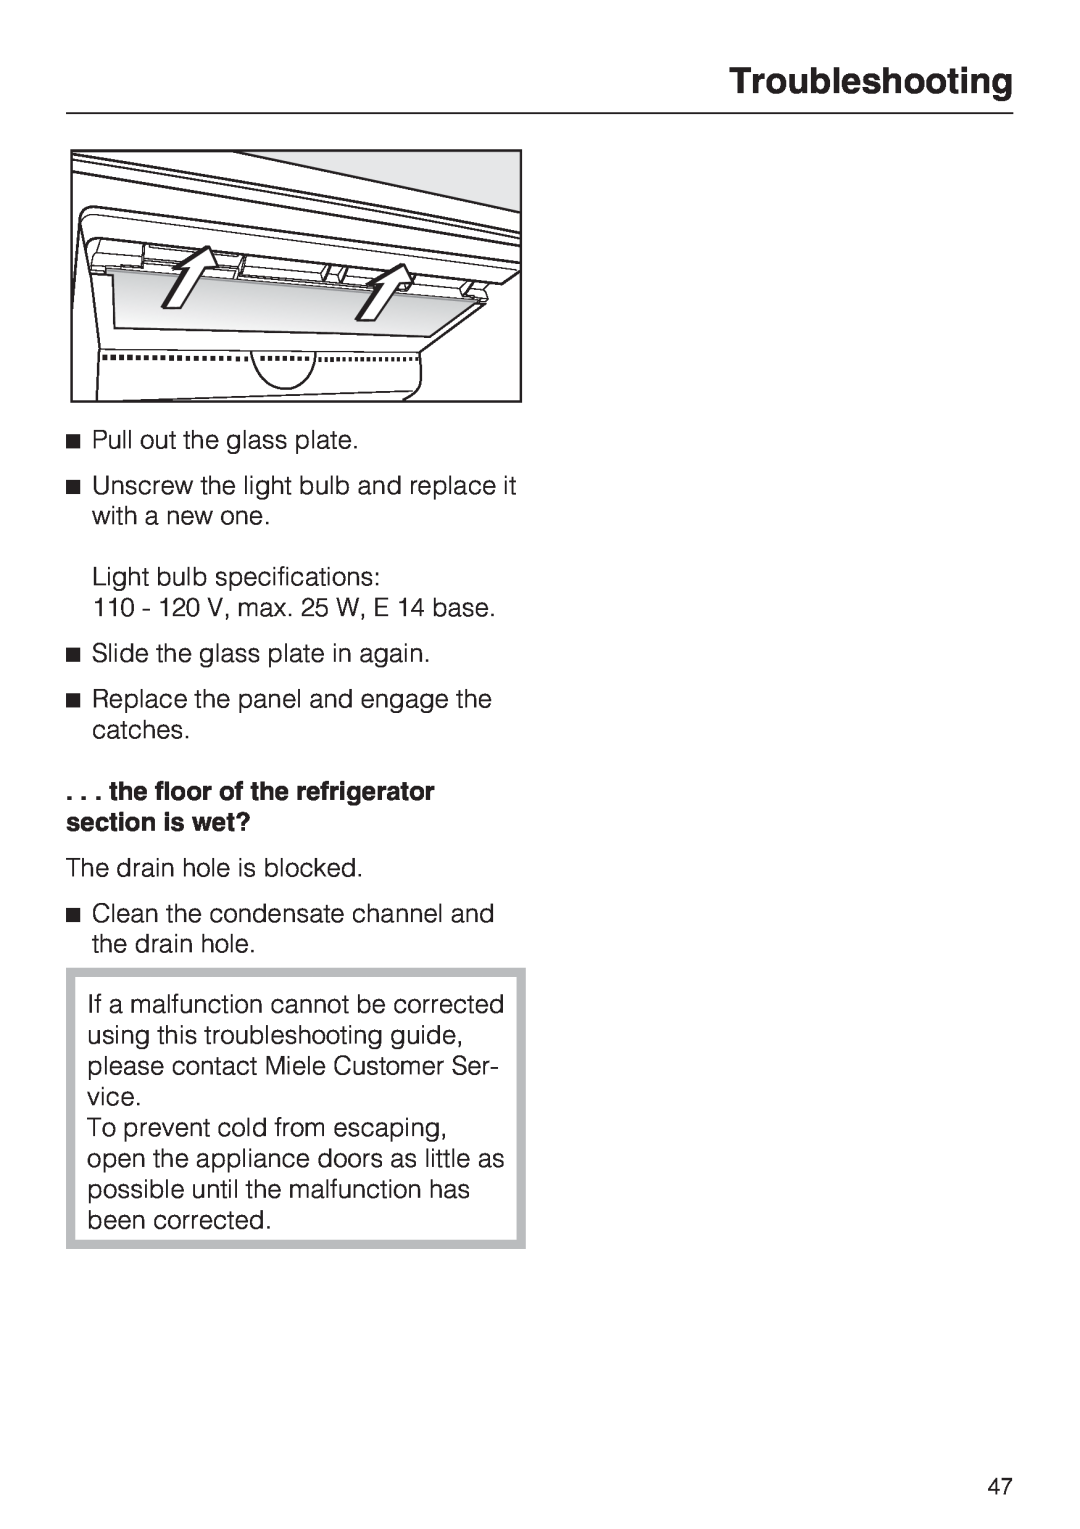 Miele KFN 14943 SDE ED installation instructions the floor of the refrigerator section is wet?, Troubleshooting 